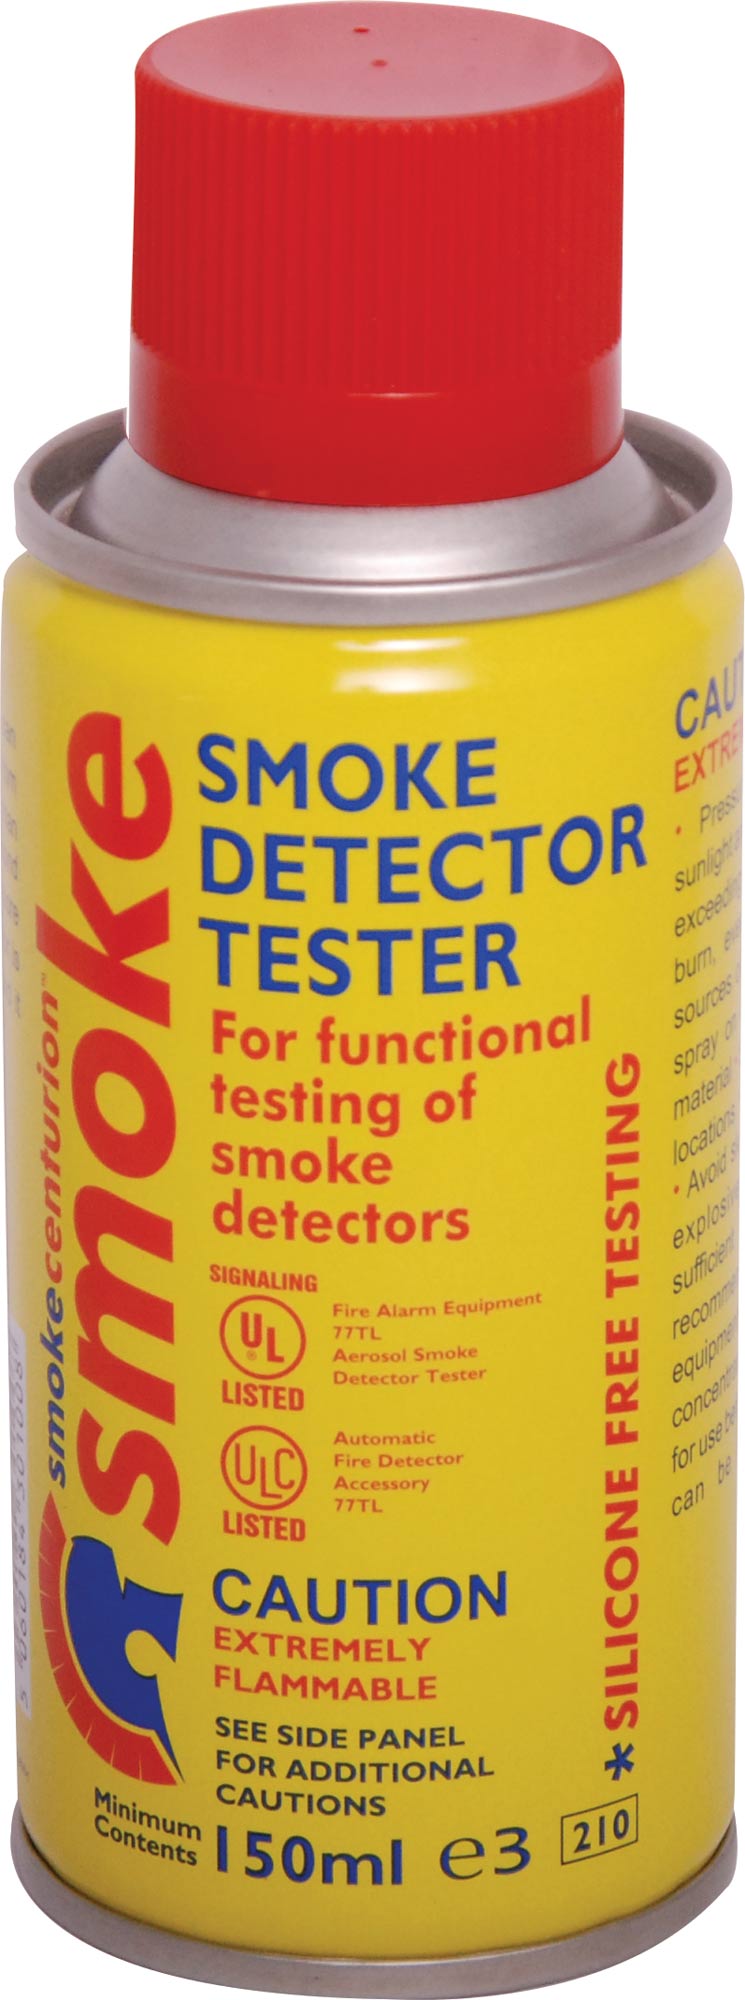 CANNED SMOKE FOR SMOKE DETECTOR TESTING 150ml CAN